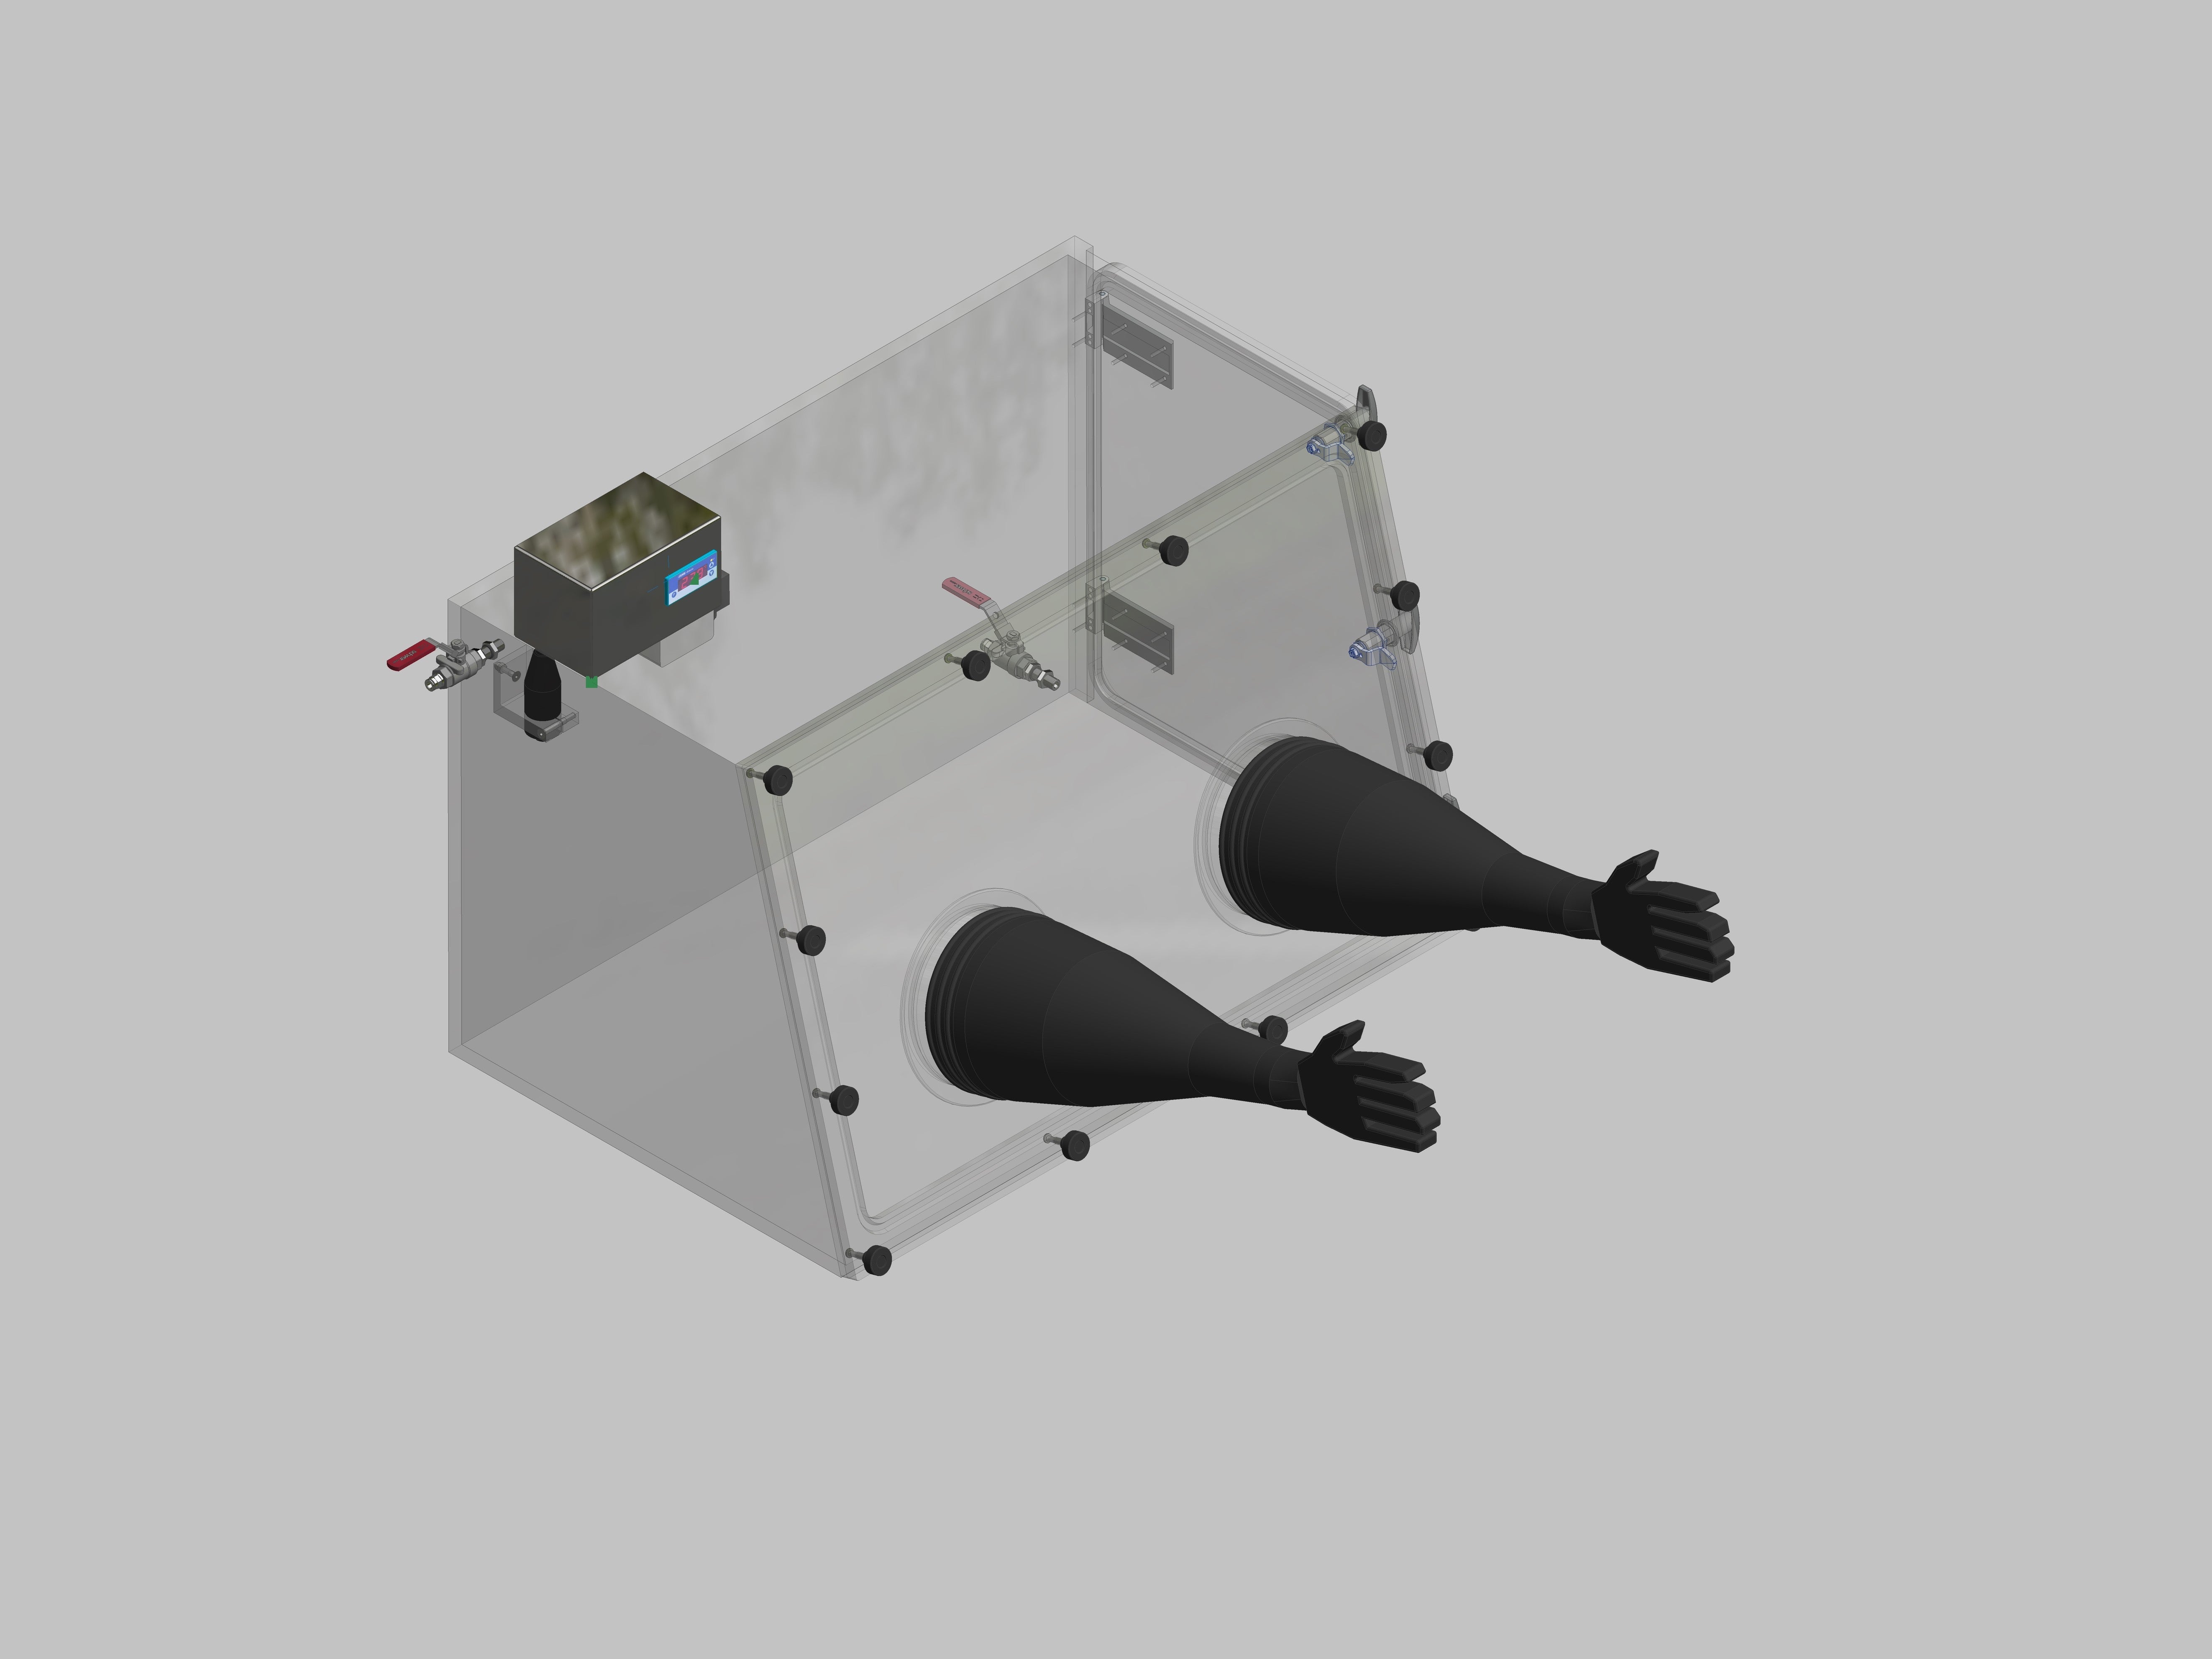 Glovebox made of acrylic &gt; Gas filling: by hand, front design: removable, side design: hinged doors, control: oxygen display